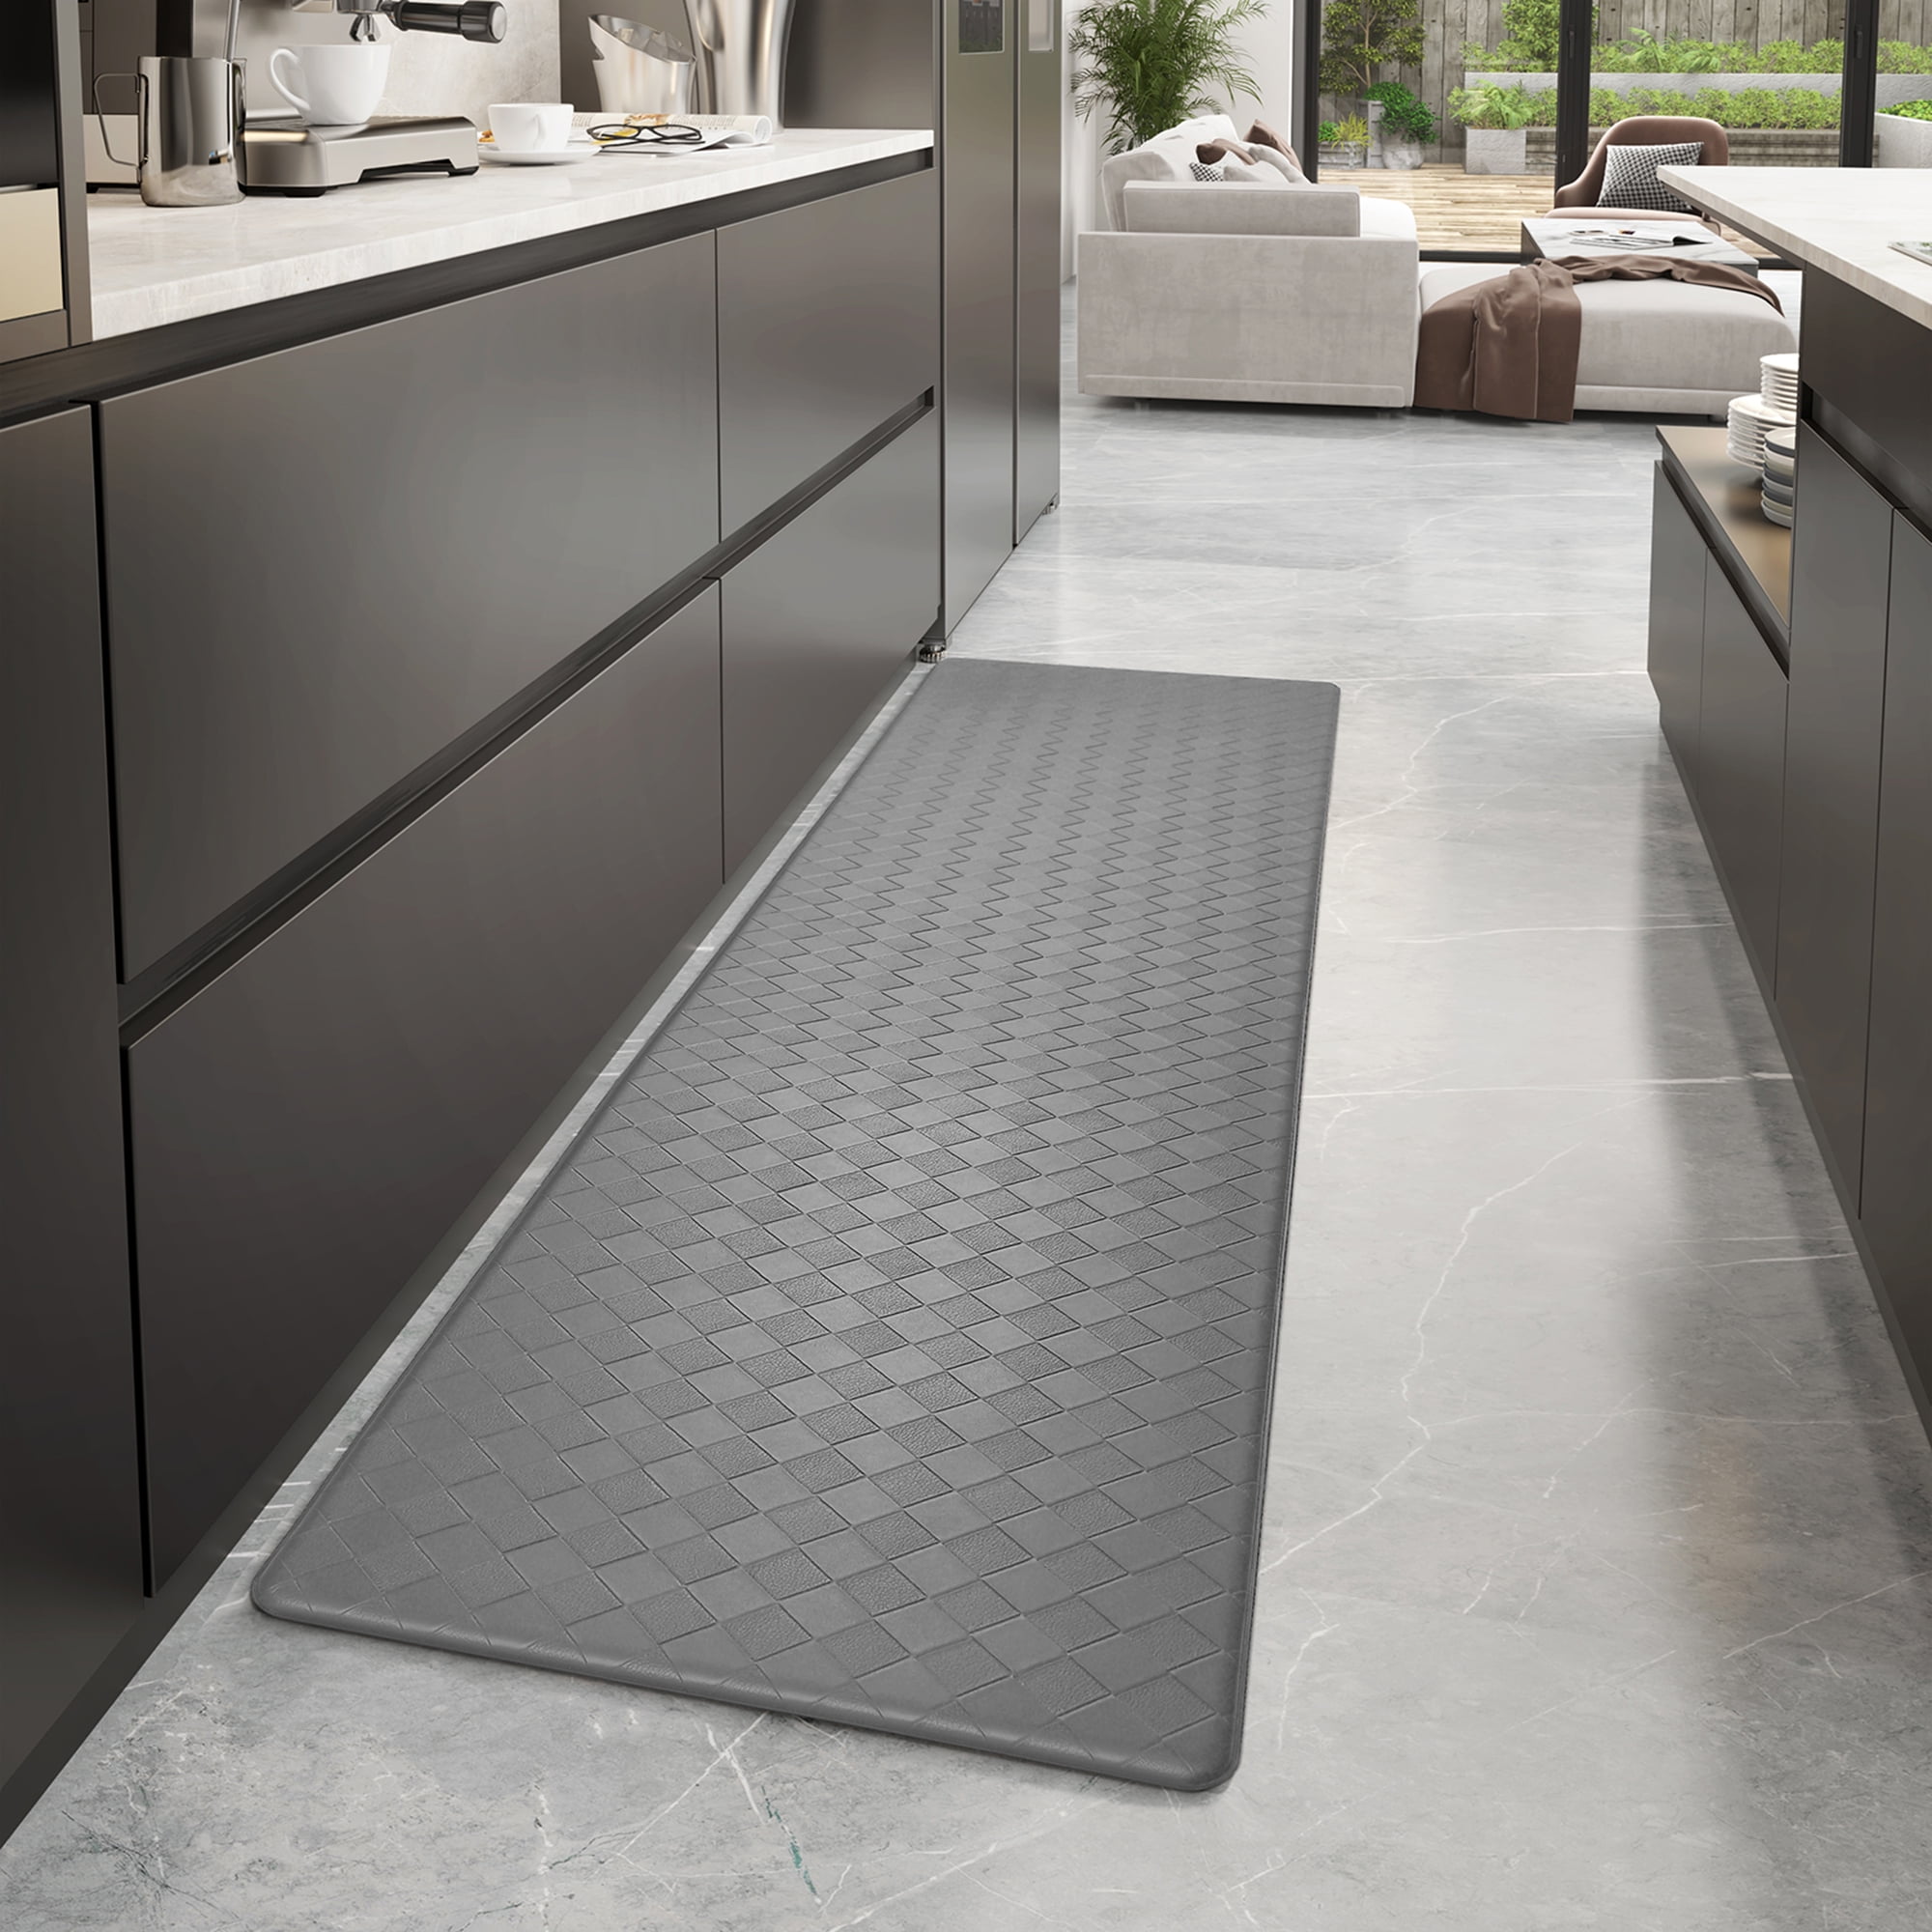  KIMODE Anti Fatigue Kitchen Mats for Floor 2PCS,17x47+17x29  Farmhouse Kitchen Rugs Non Slip Rubber Backing,Waterproof Cushioned  Standing Mat for Office,Laundry,Sink,Desk,Grey : Home & Kitchen